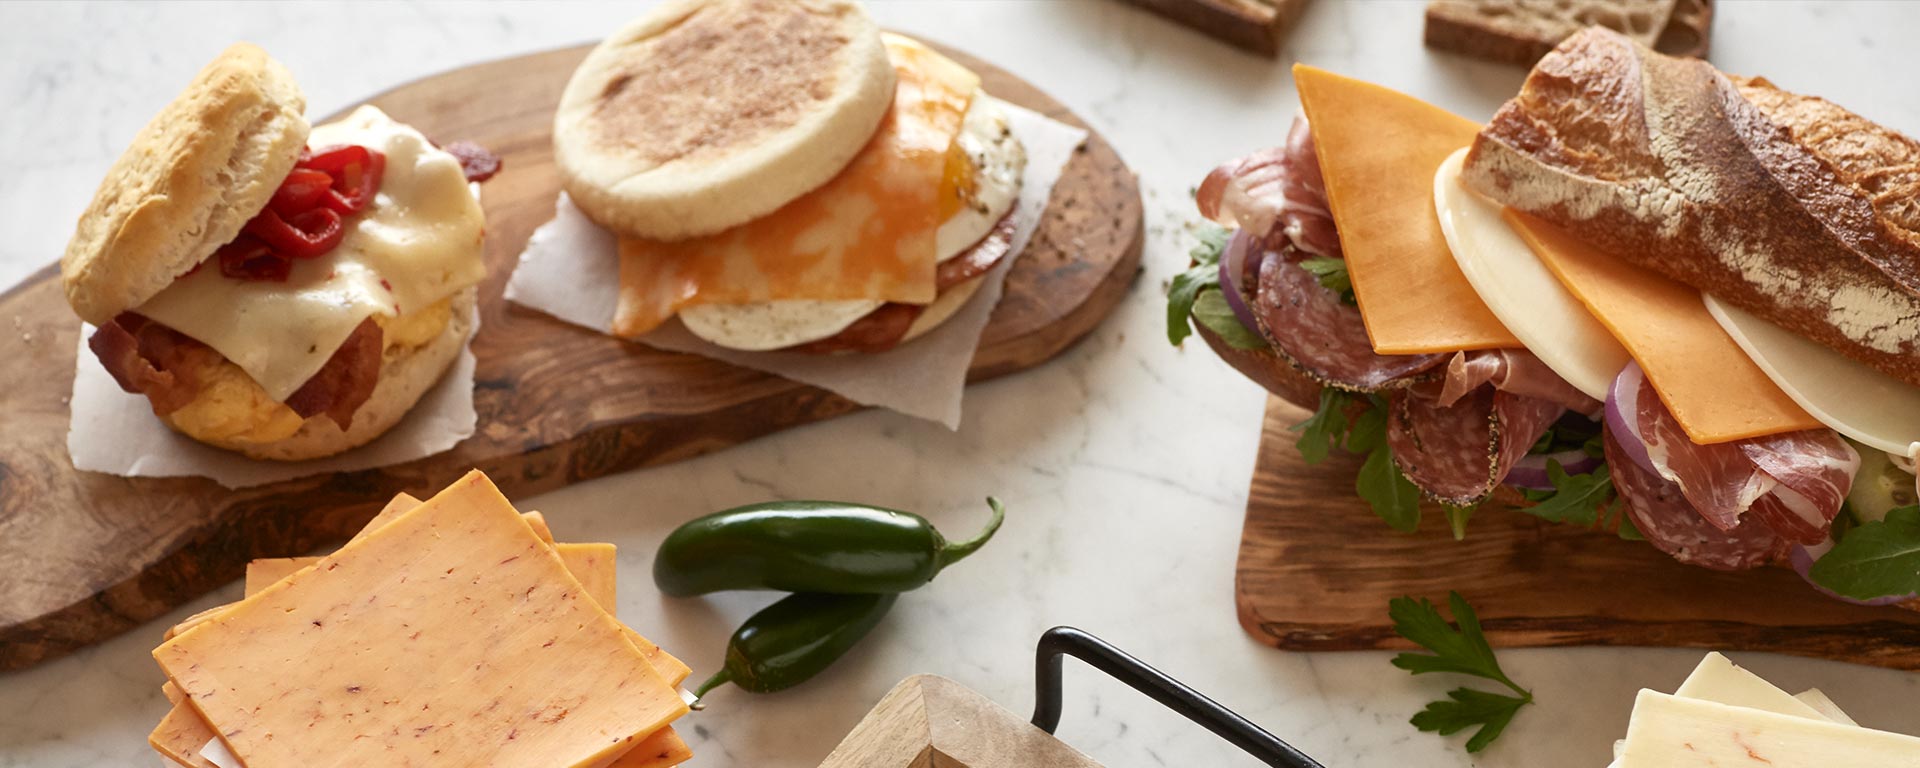 Breakfast sandwiches with cheese, and a sub sandwich plated nicely on a marble surface.